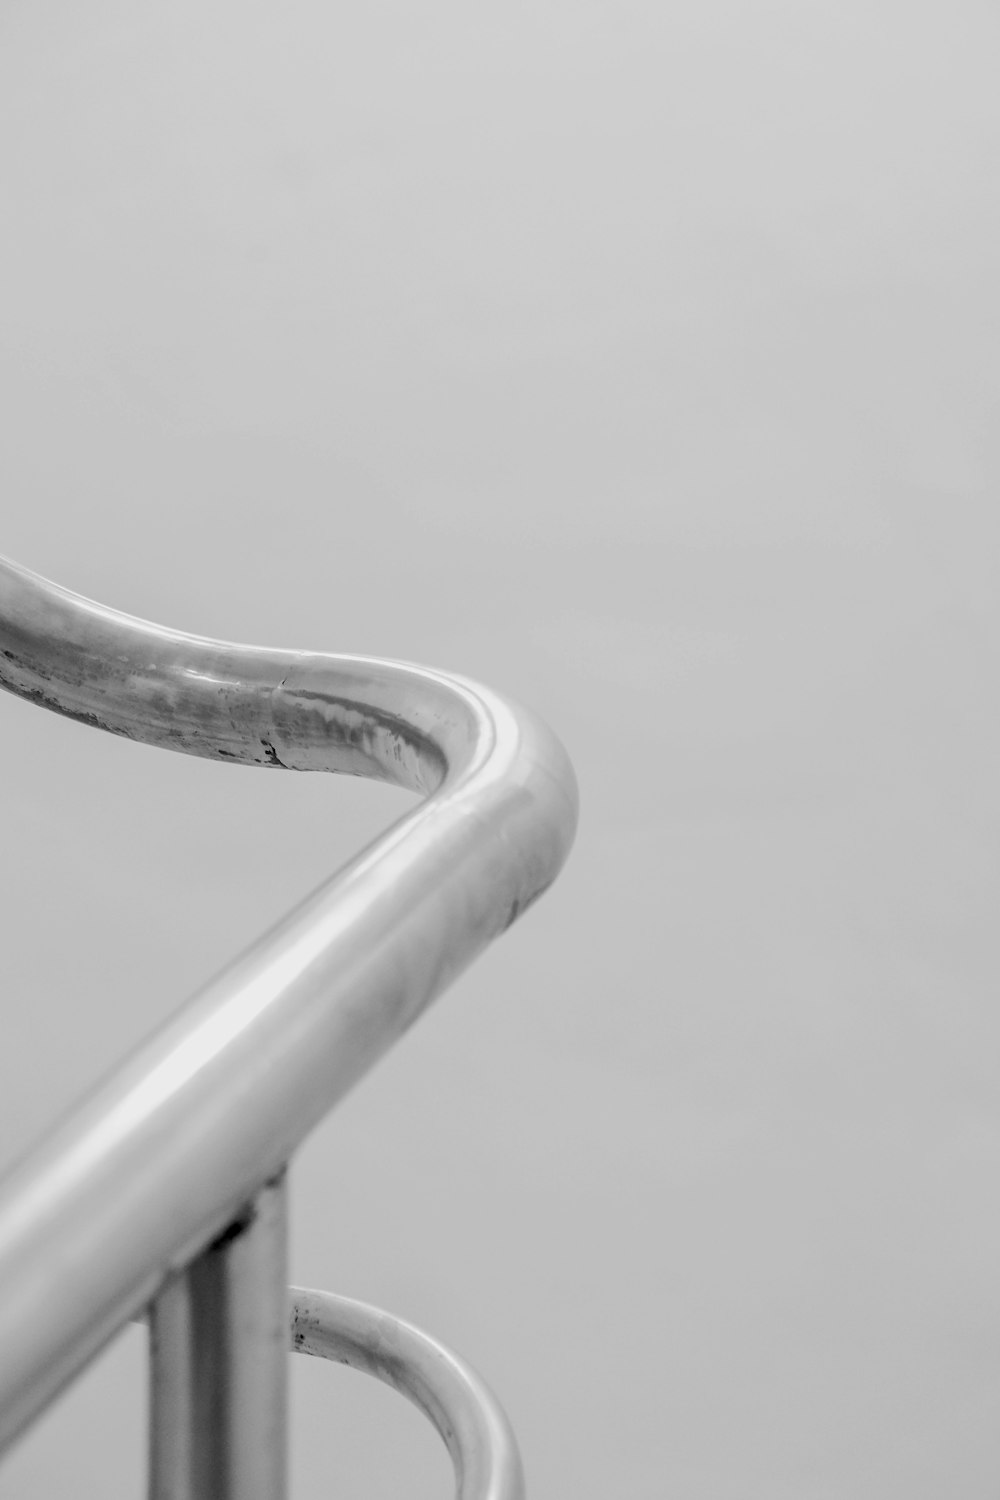 close up photo of stainless steel curved railings